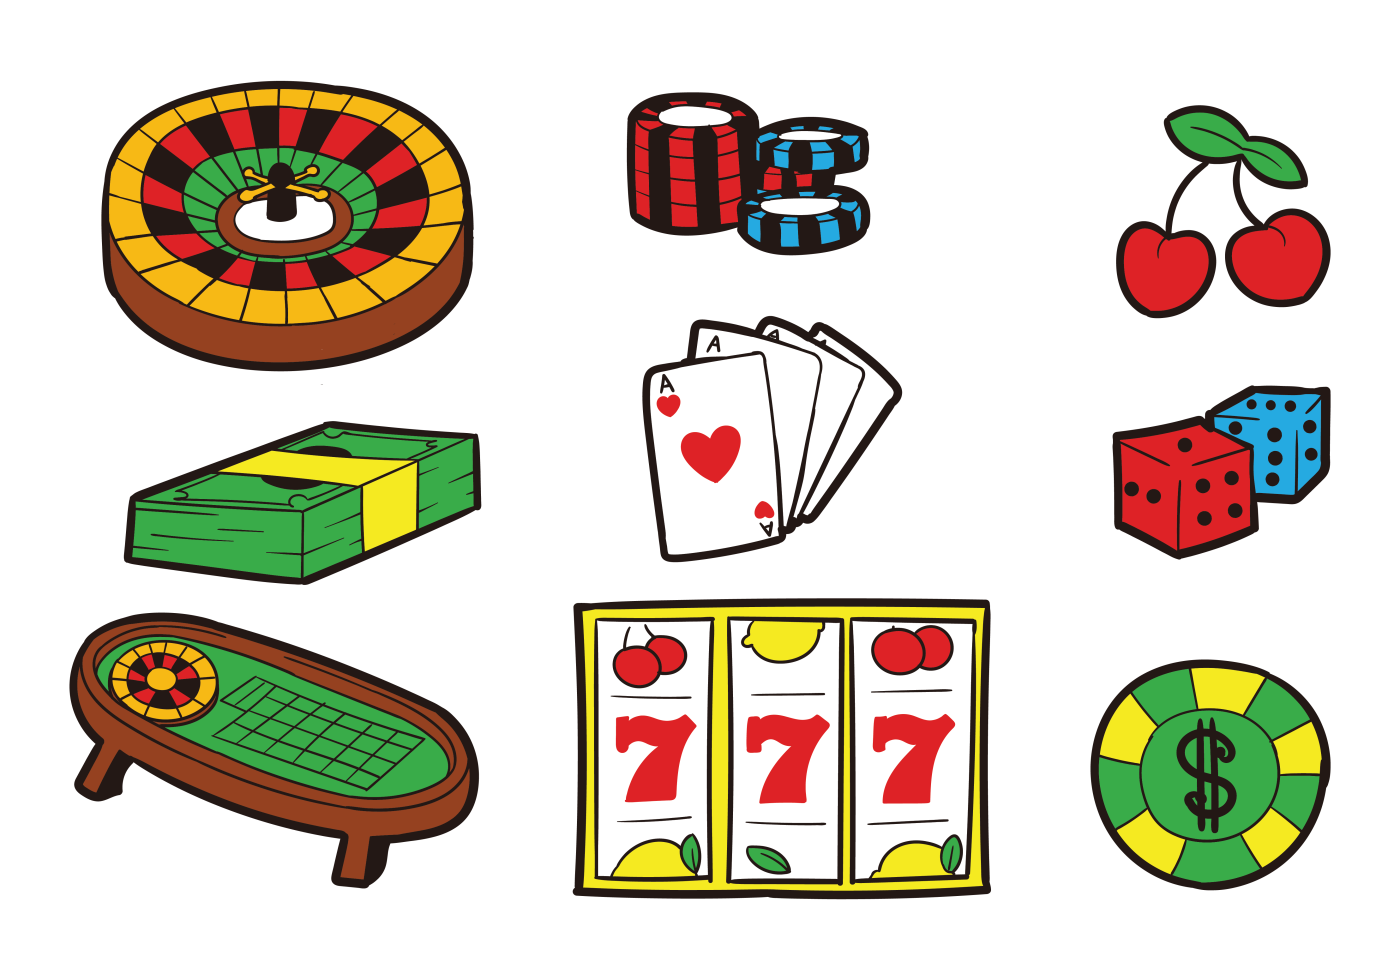 Roulette Table Icons Vector - Download Free Vectors, Clipart Graphics & Vector Art